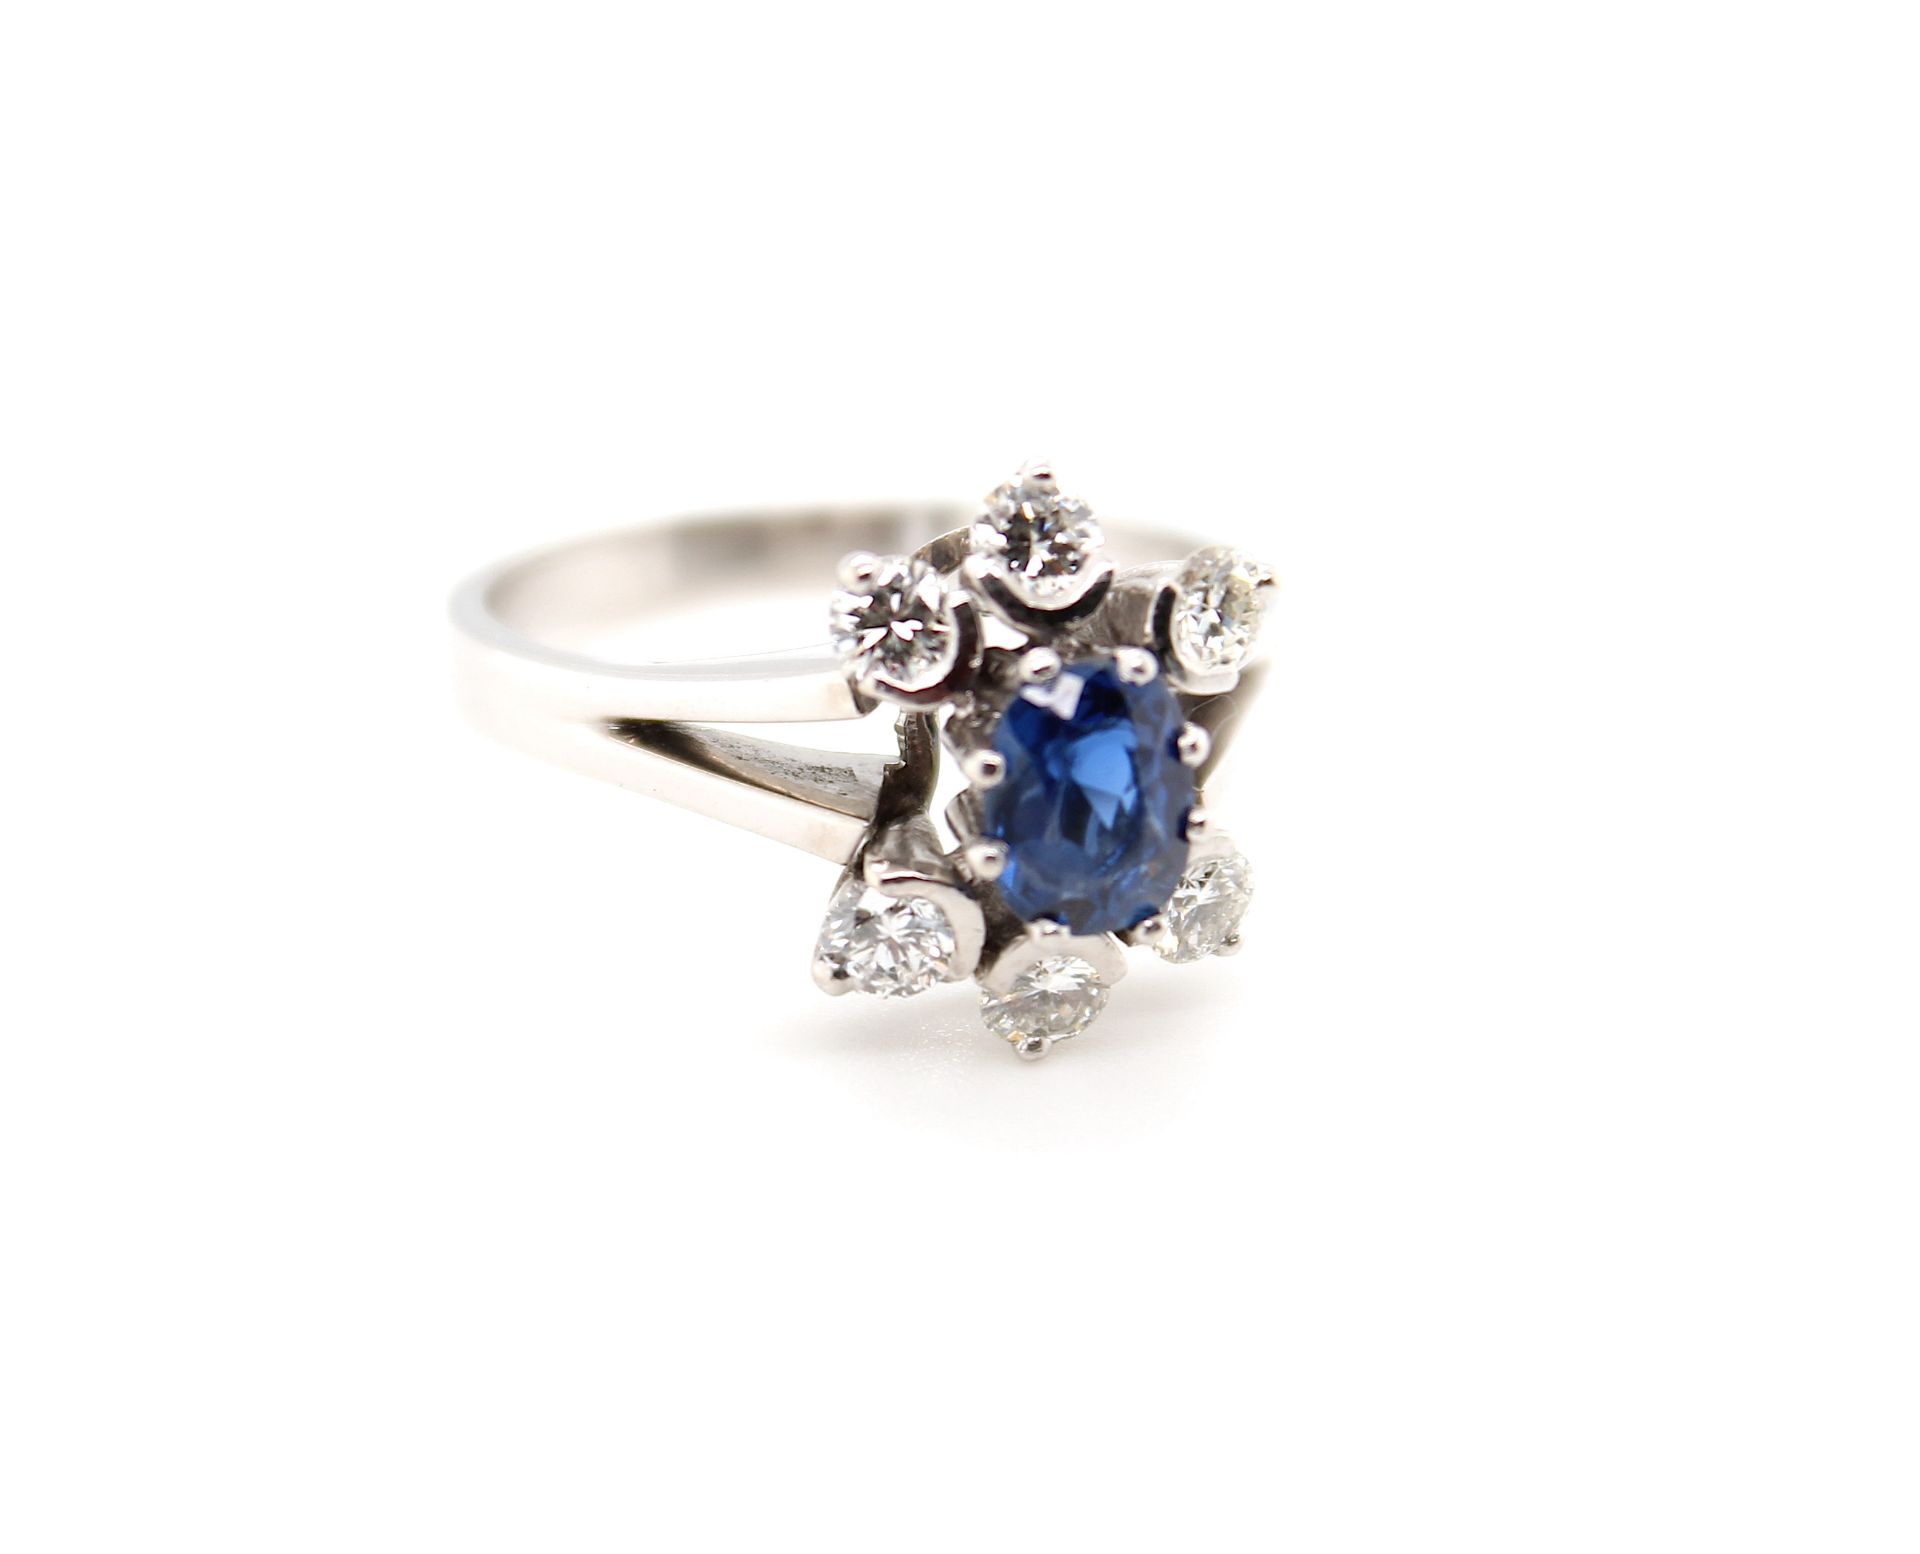 Ring with sapphire and total ca. 0.60 ct brilliants - Image 3 of 4